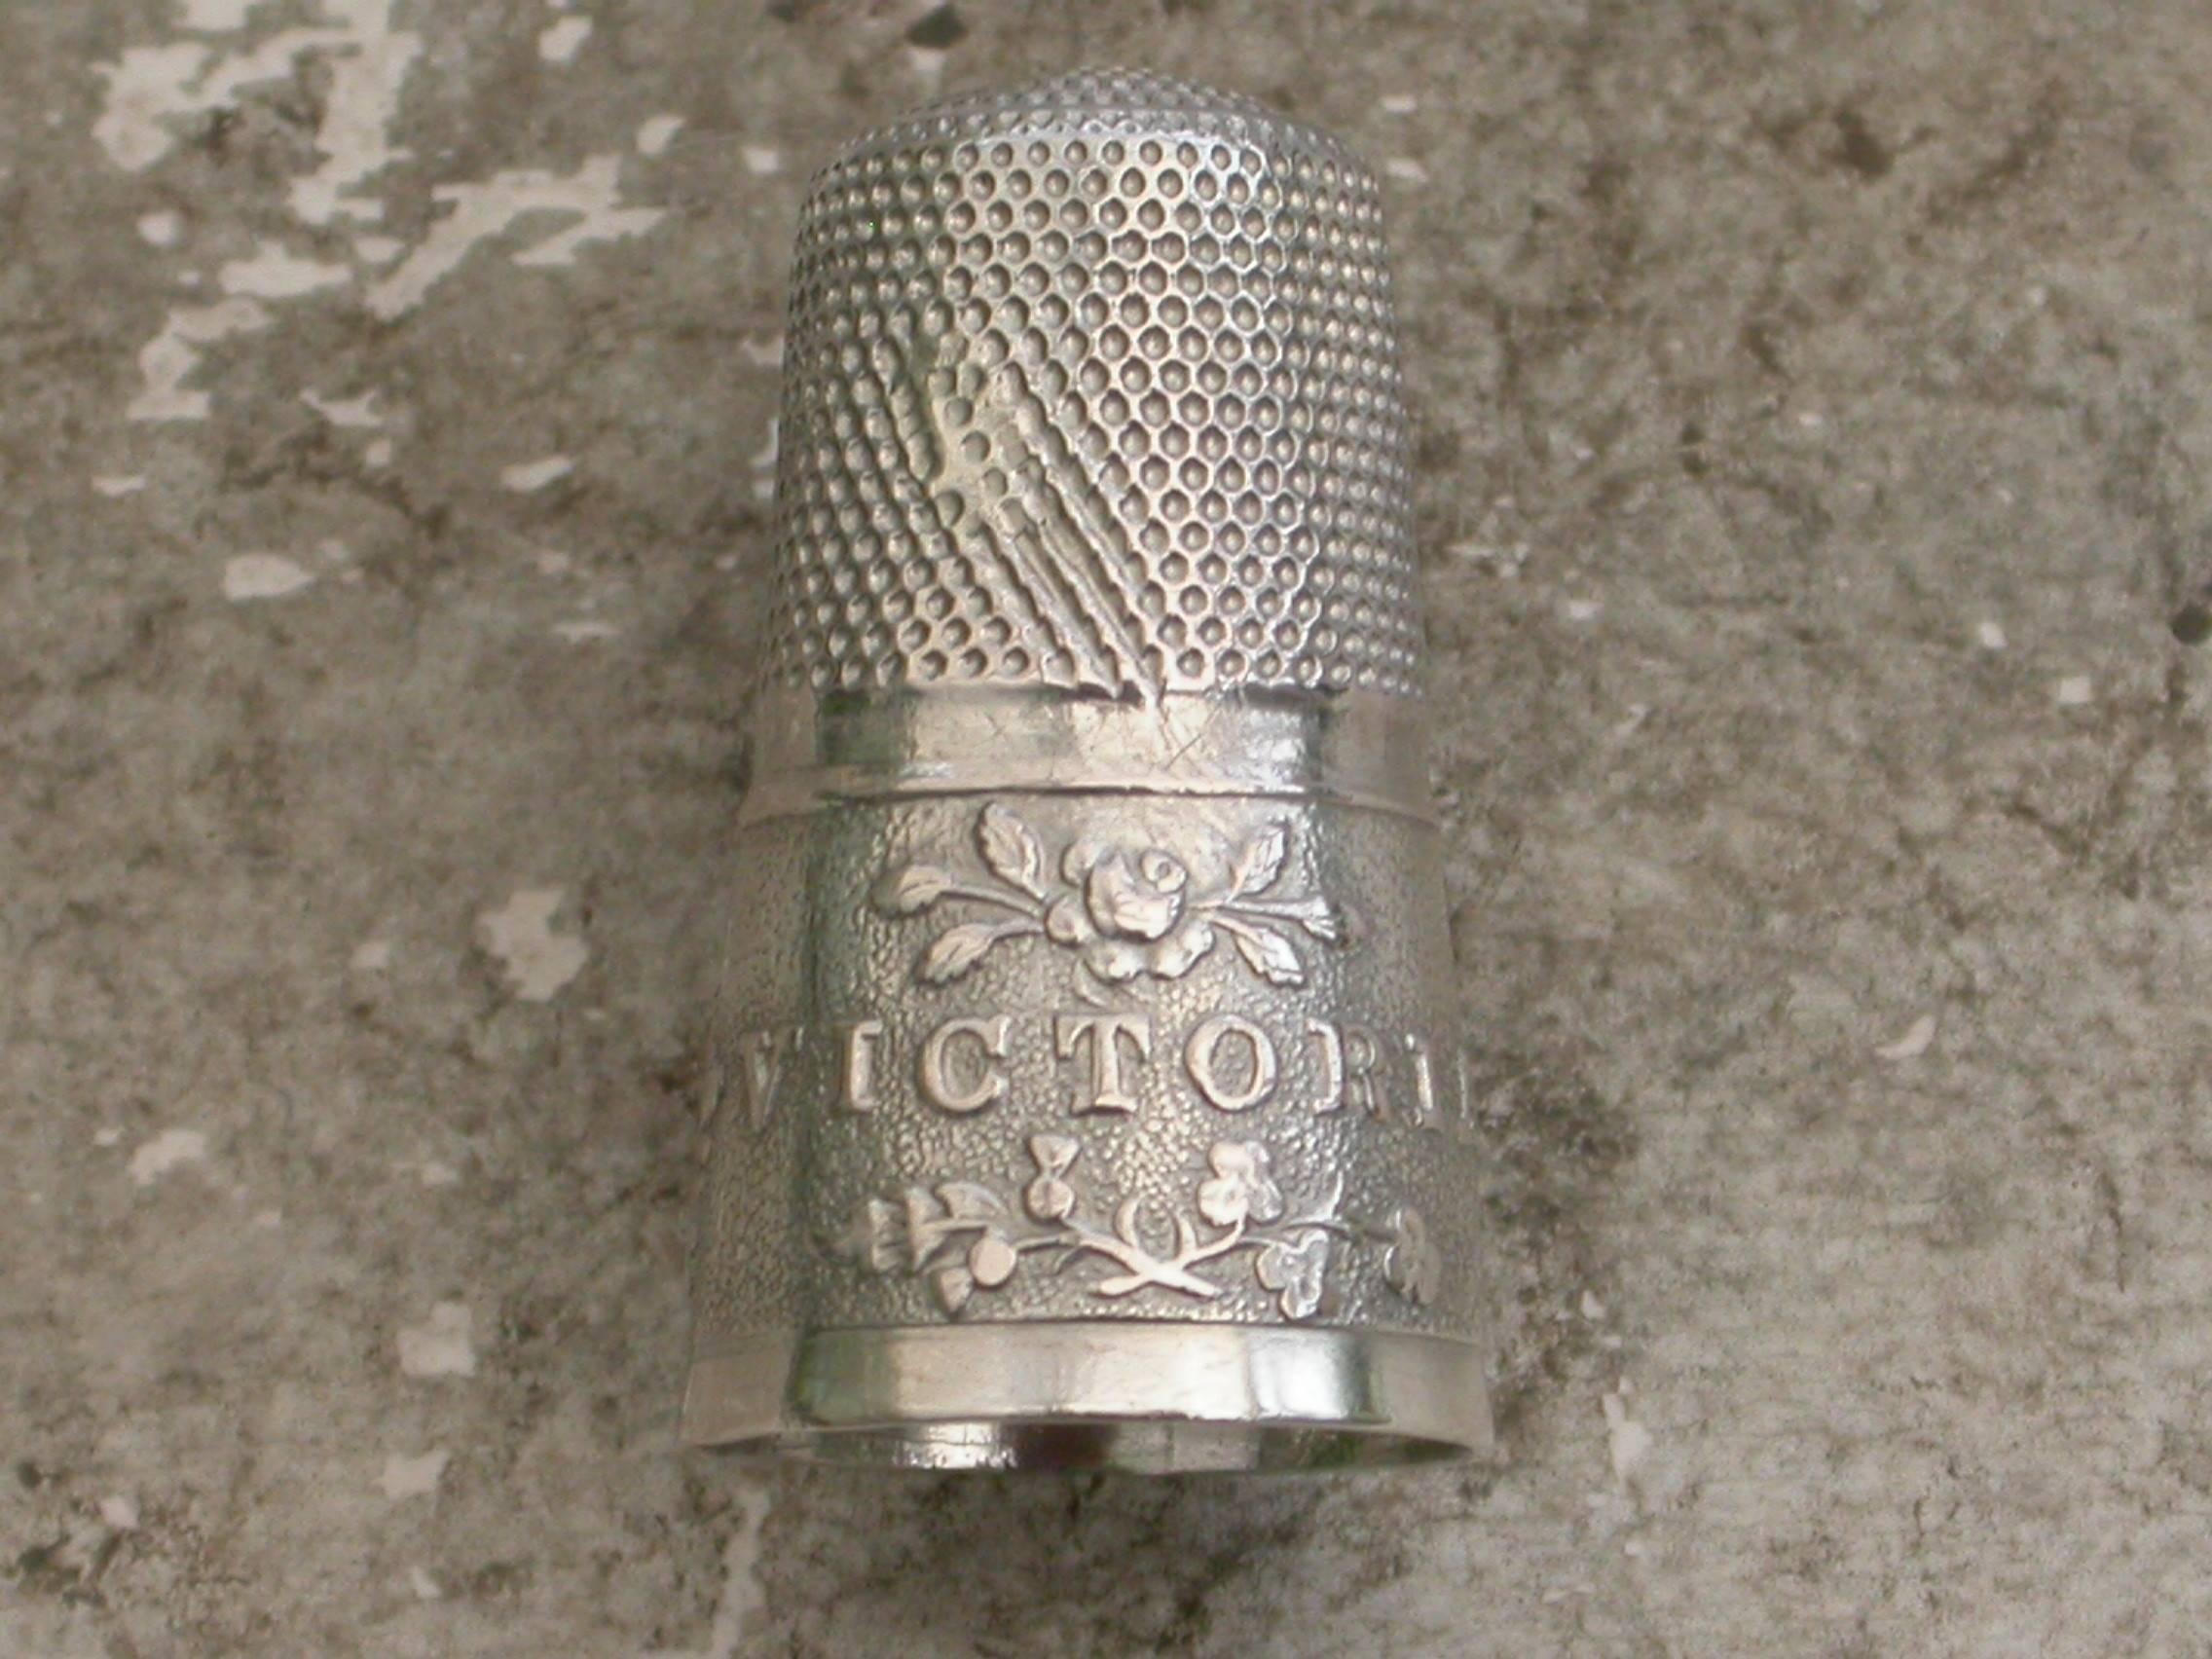 A rare Victorian commemorative silver thimble embossed on the wide band with a bust of Queen Victoria(young head), a vacant shield and the word 'VICTORIA' between the flowers of the union (rose, thistle and shamrock).

Made to commemorate the